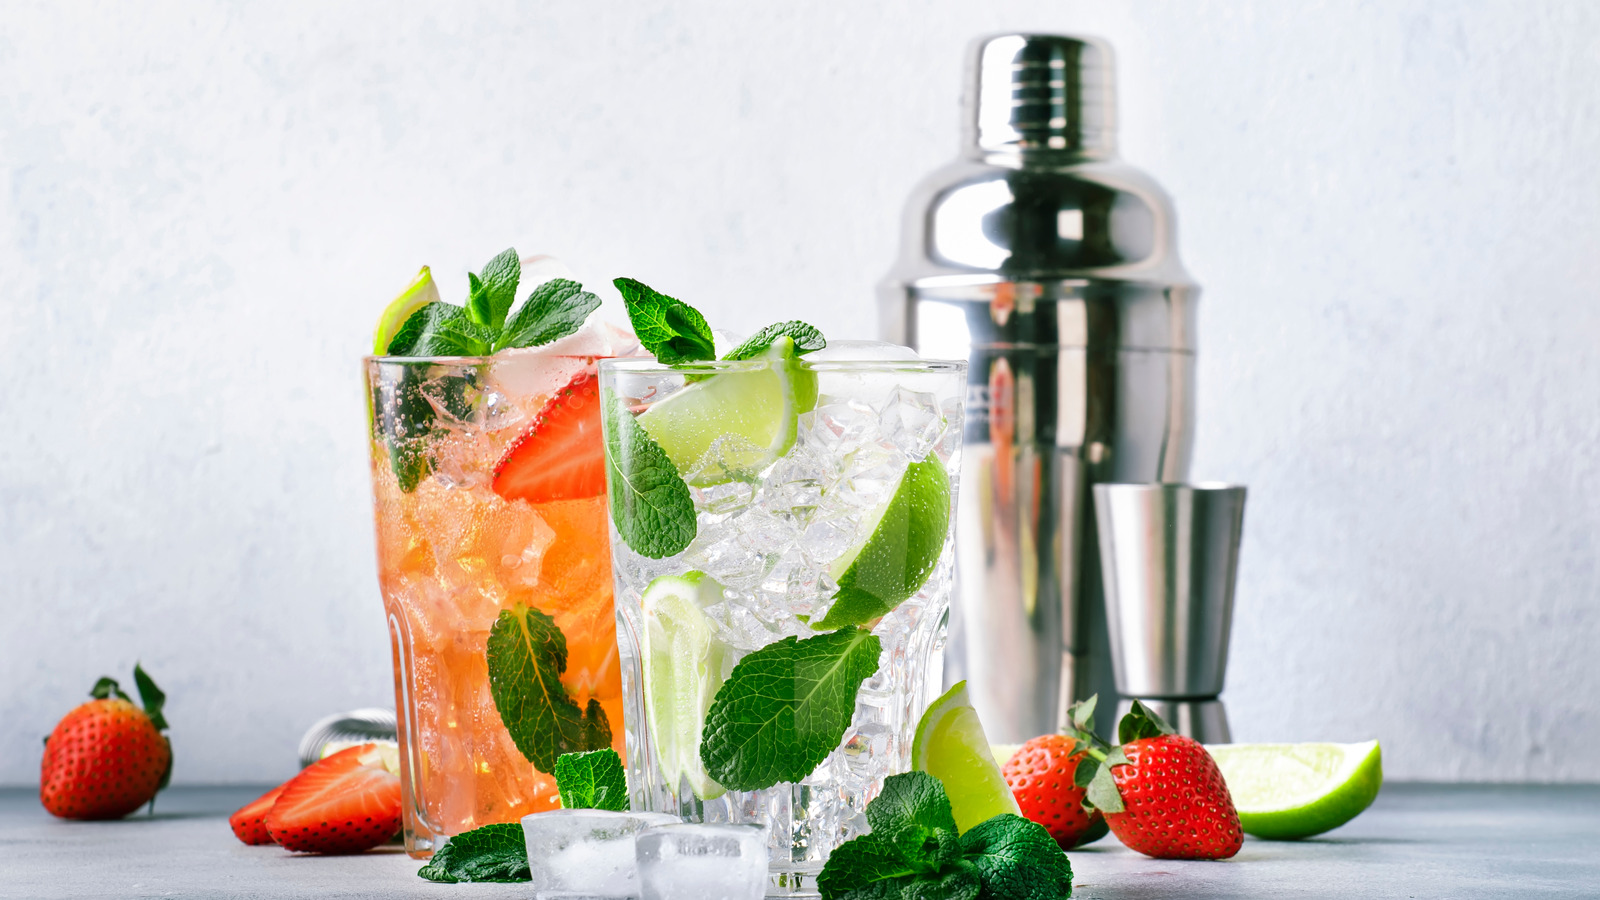 Refine Your Bartending Skills At Home With These Sleek Products From OXO